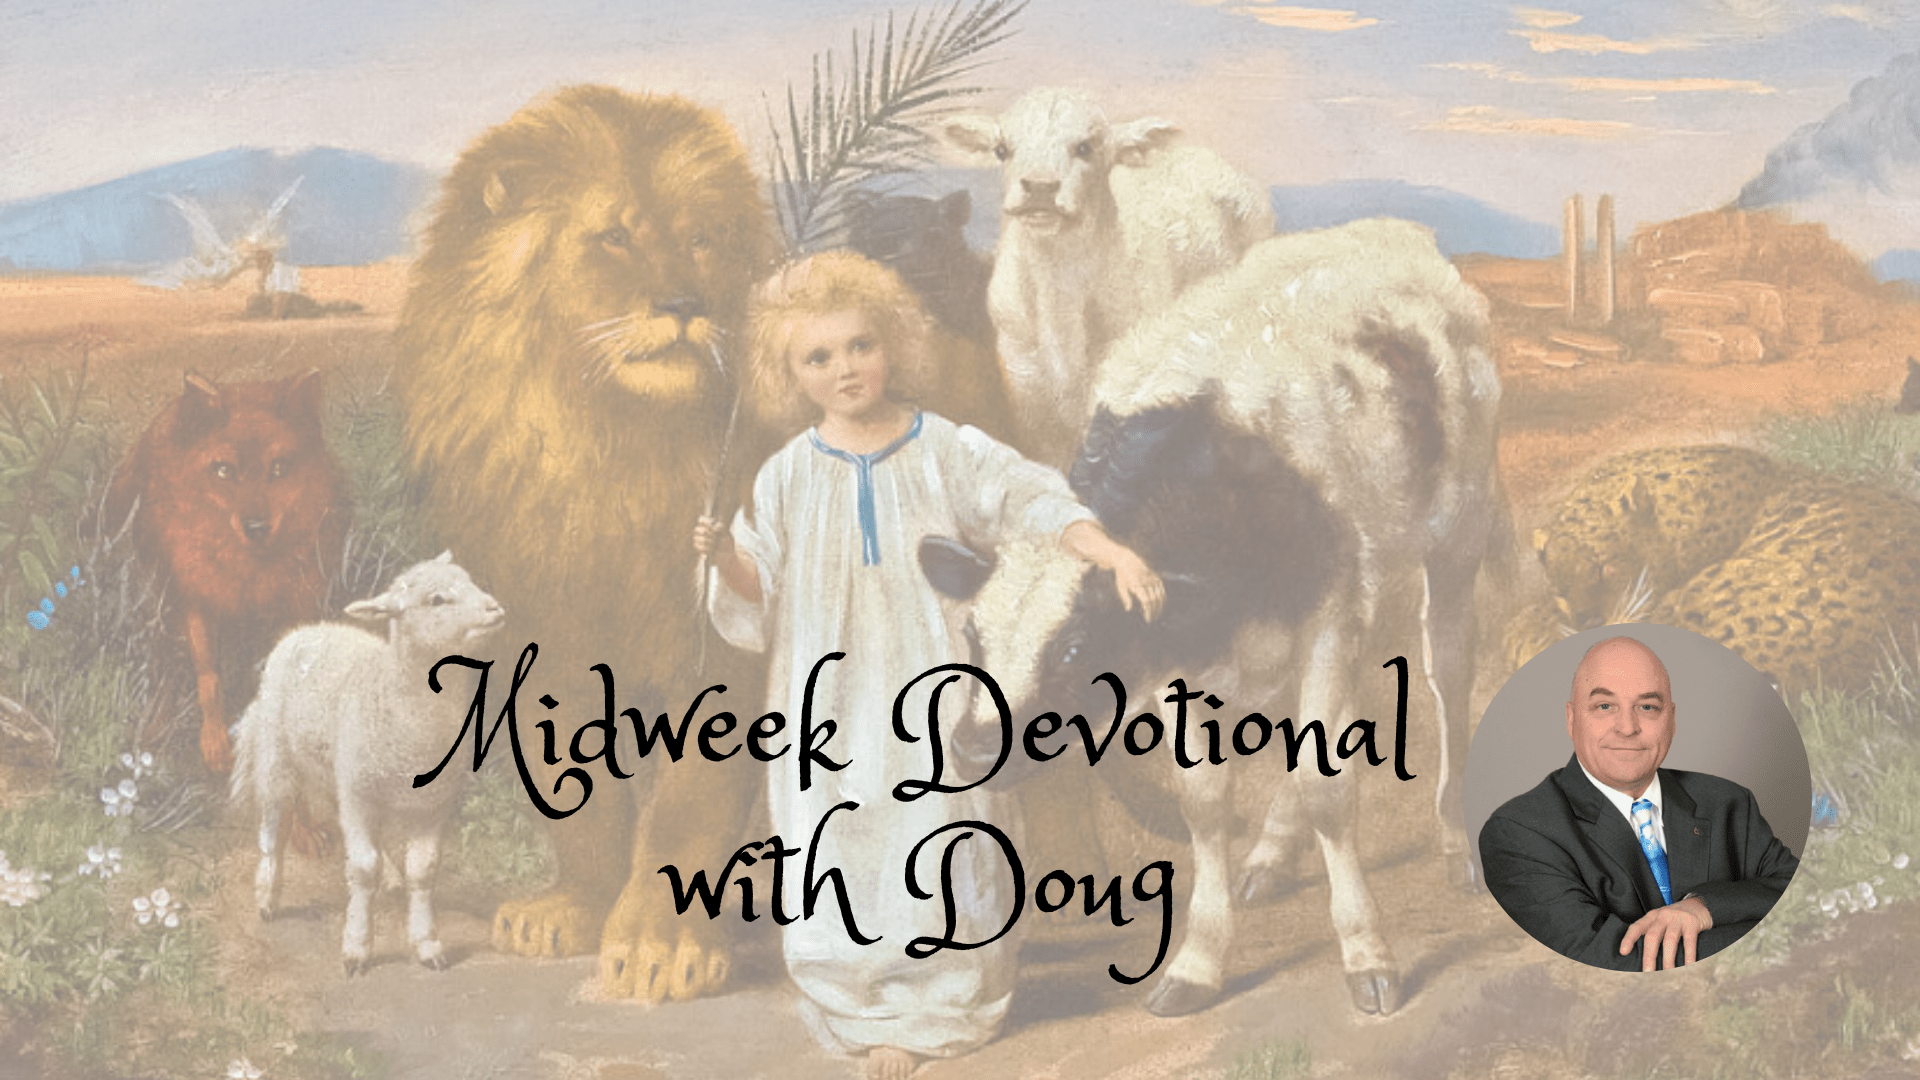 Midweek Devotional with Doug for first week of December